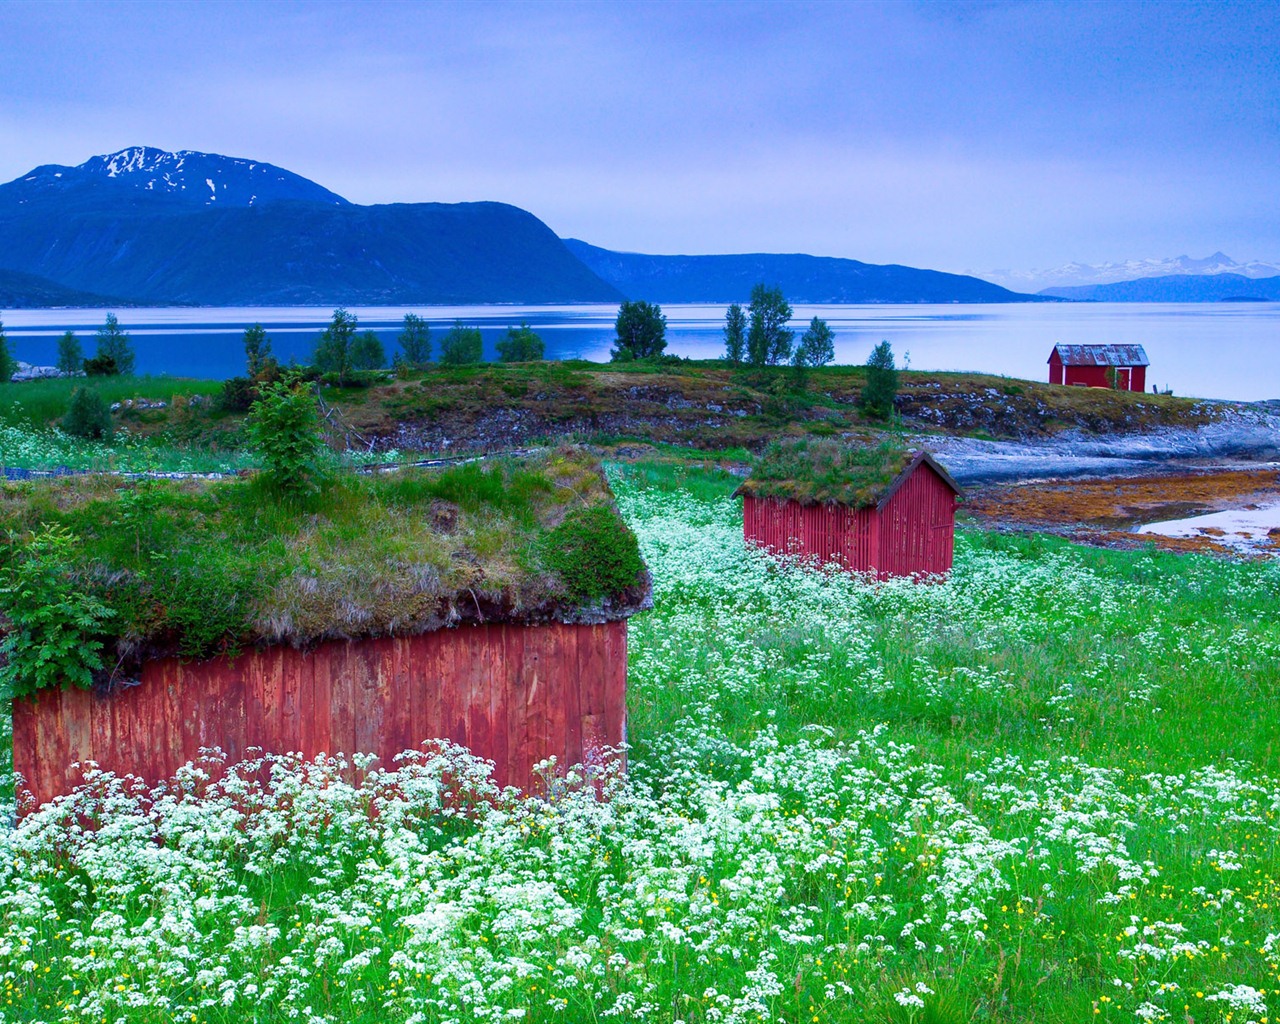 Windows 7 Wallpapers: Nordic Landscapes #3 - 1280x1024